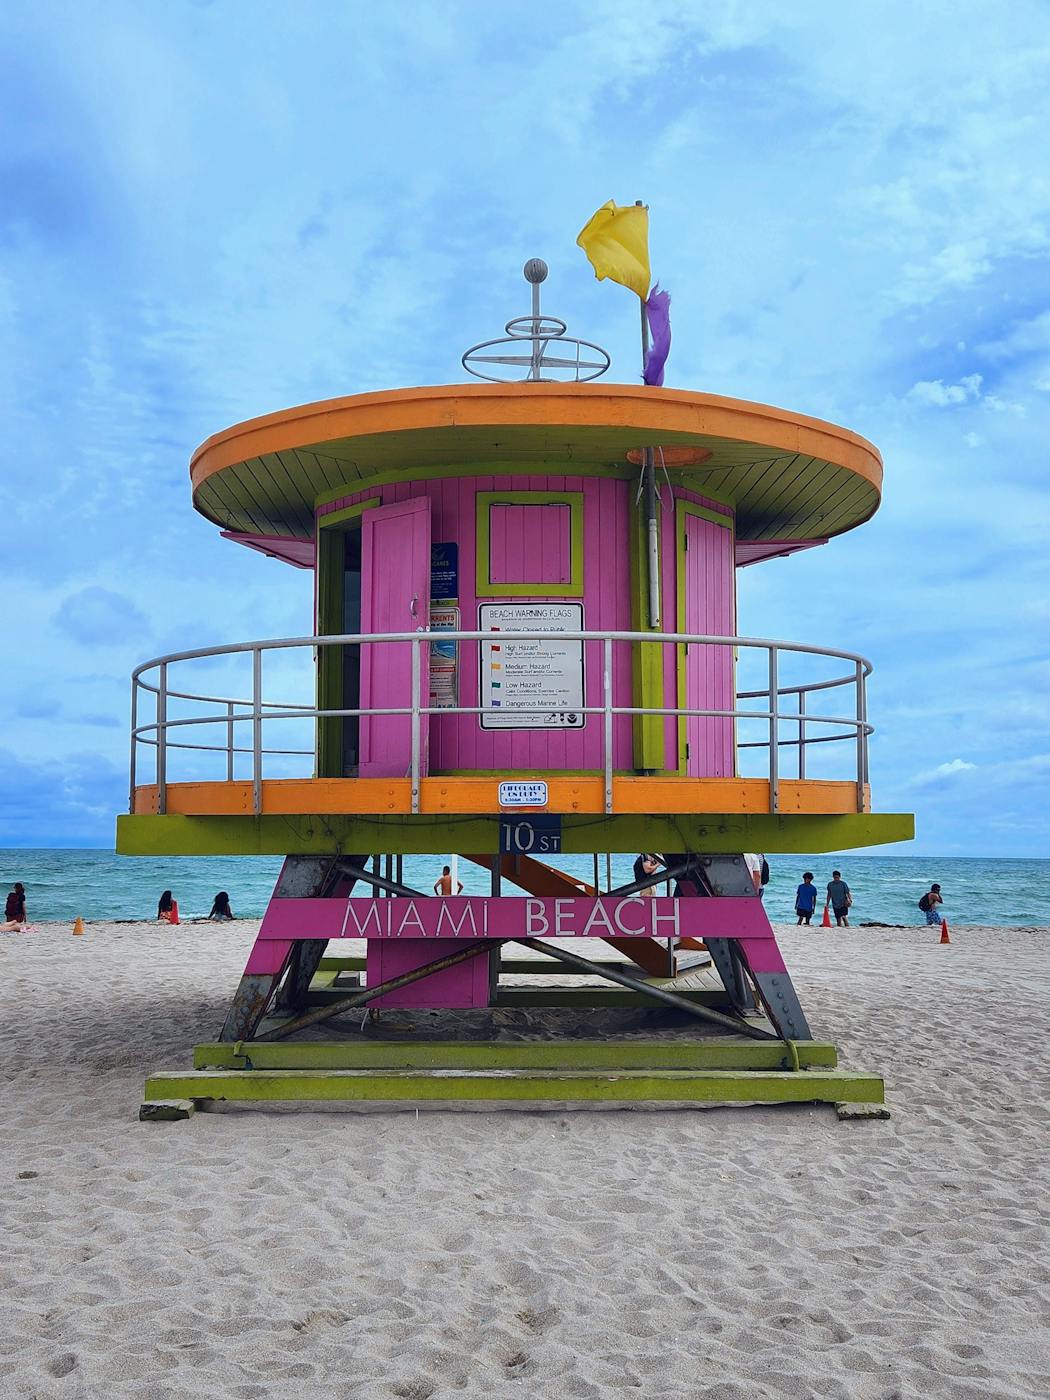 The 10th Street Lifeguard Tower in South Beach.